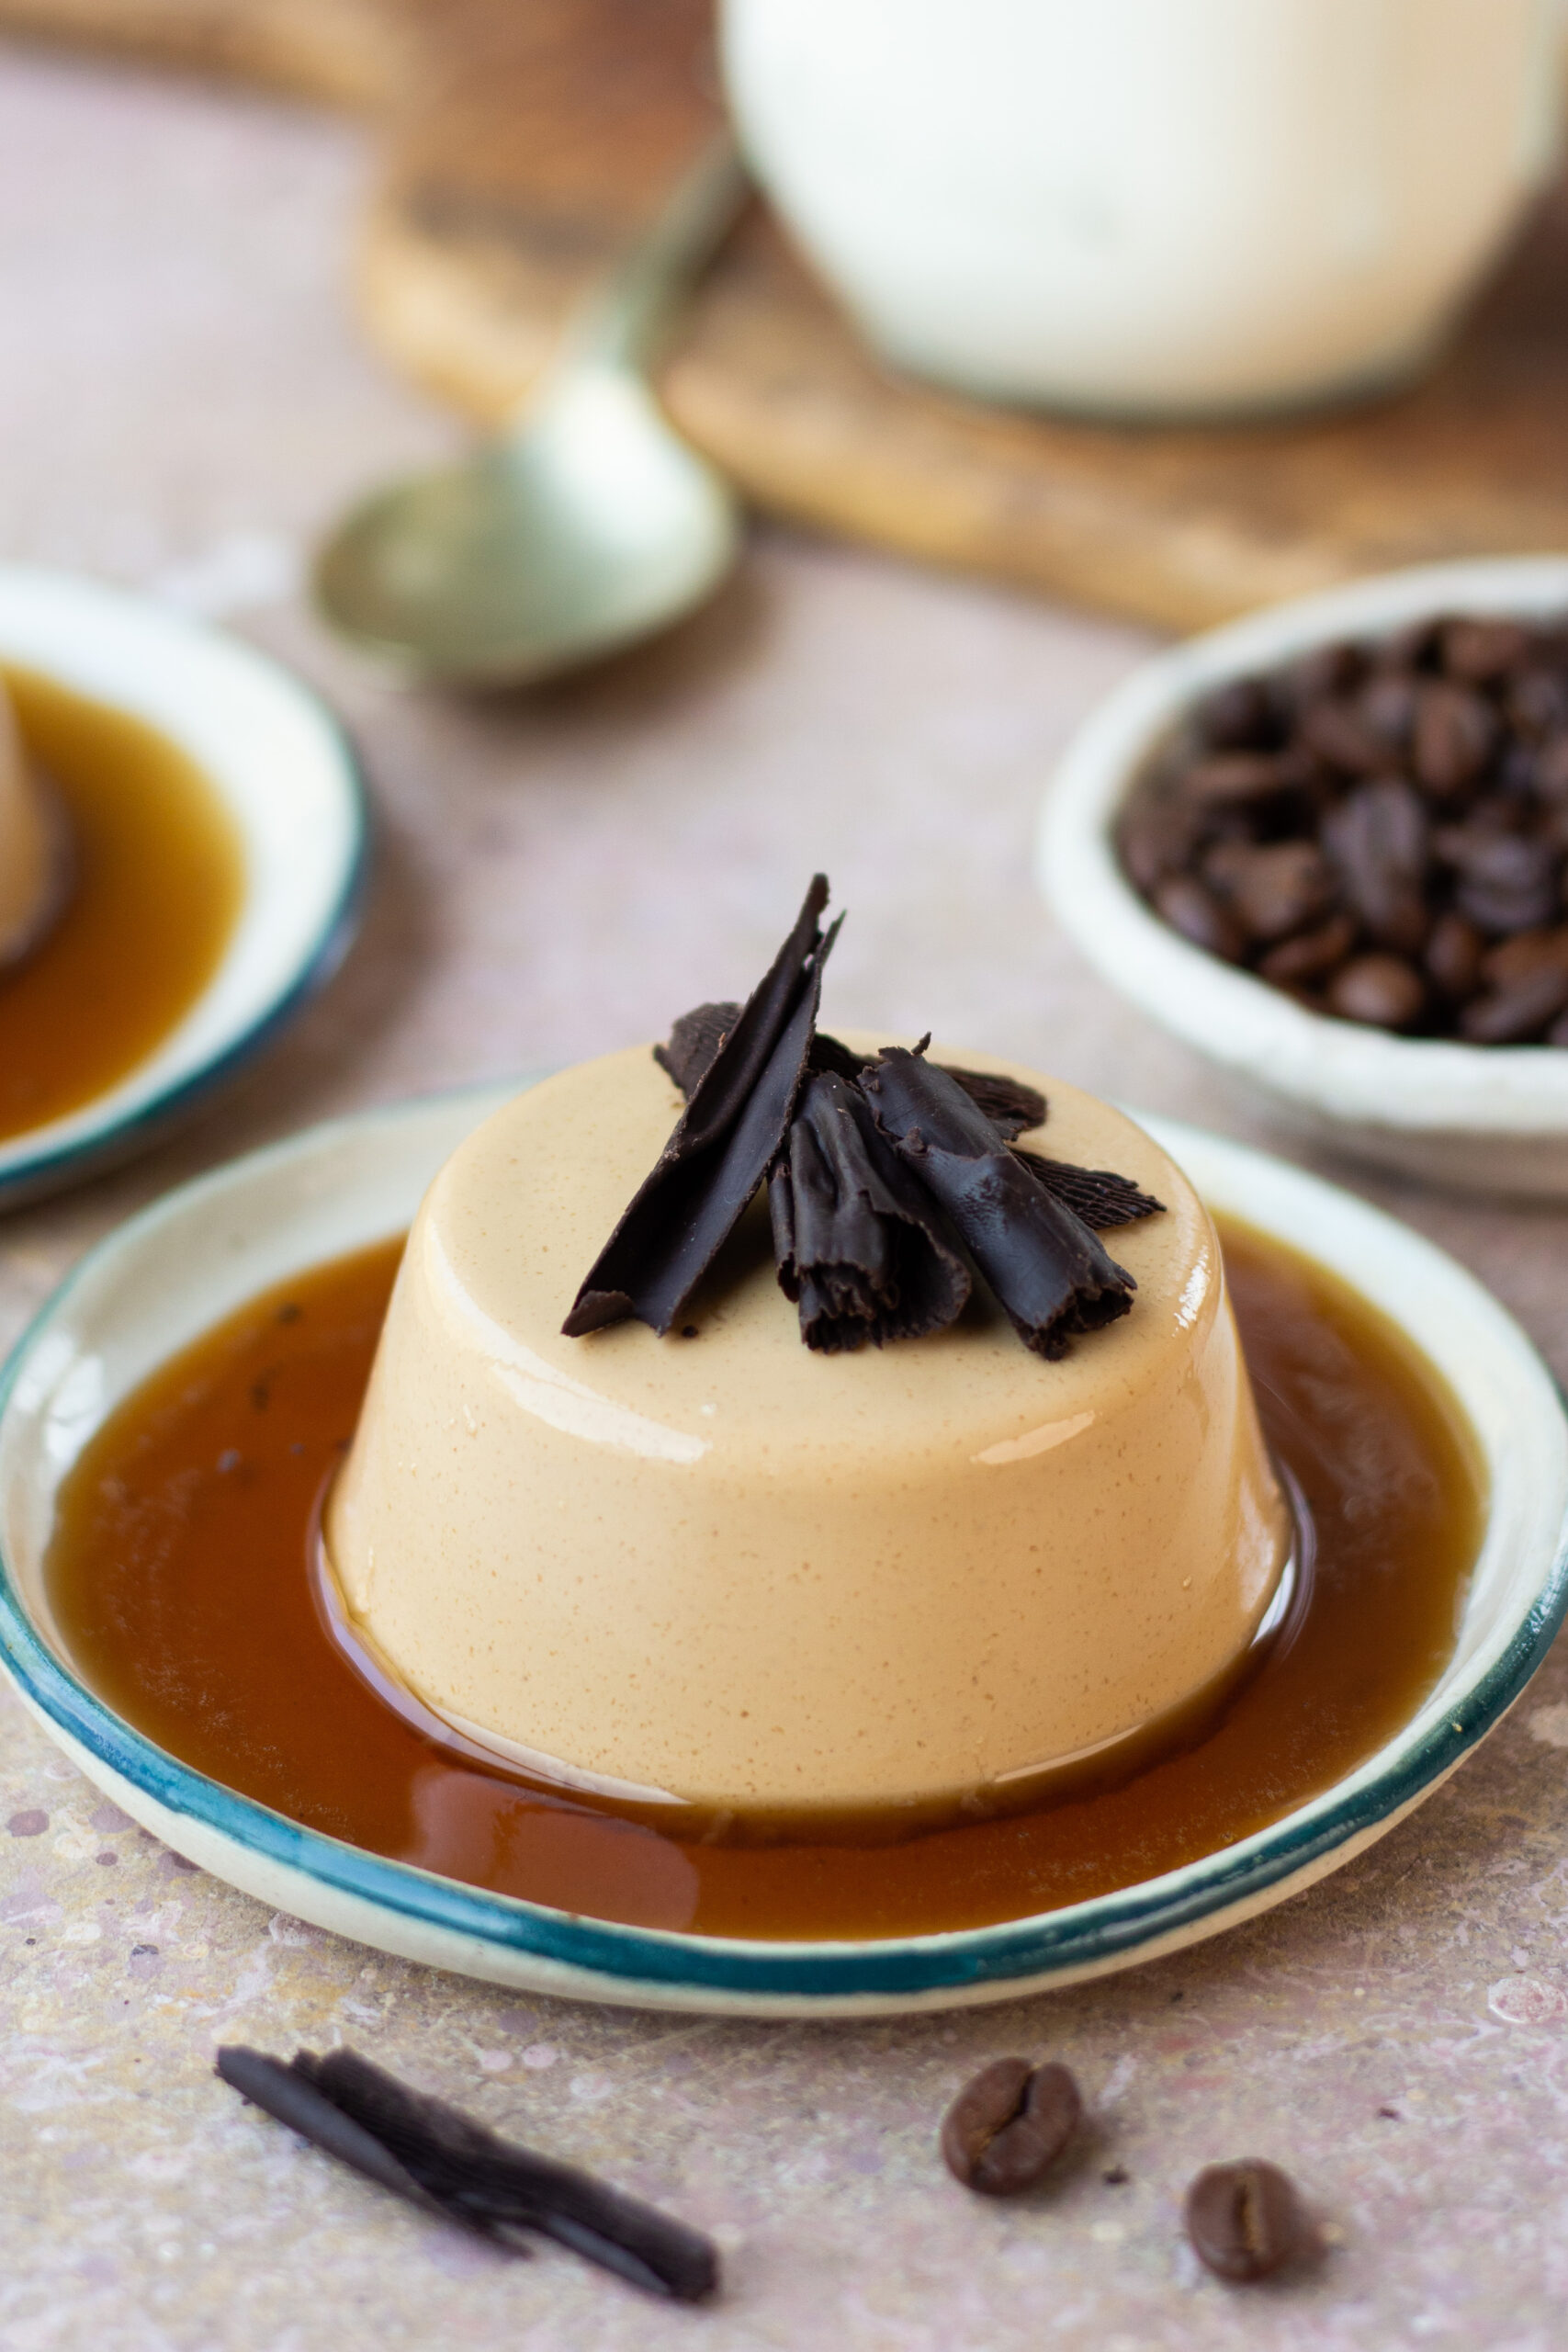 https://bakewithshivesh.com/wp-content/uploads/2023/04/coffee-panna-cotta-1-scaled.jpg